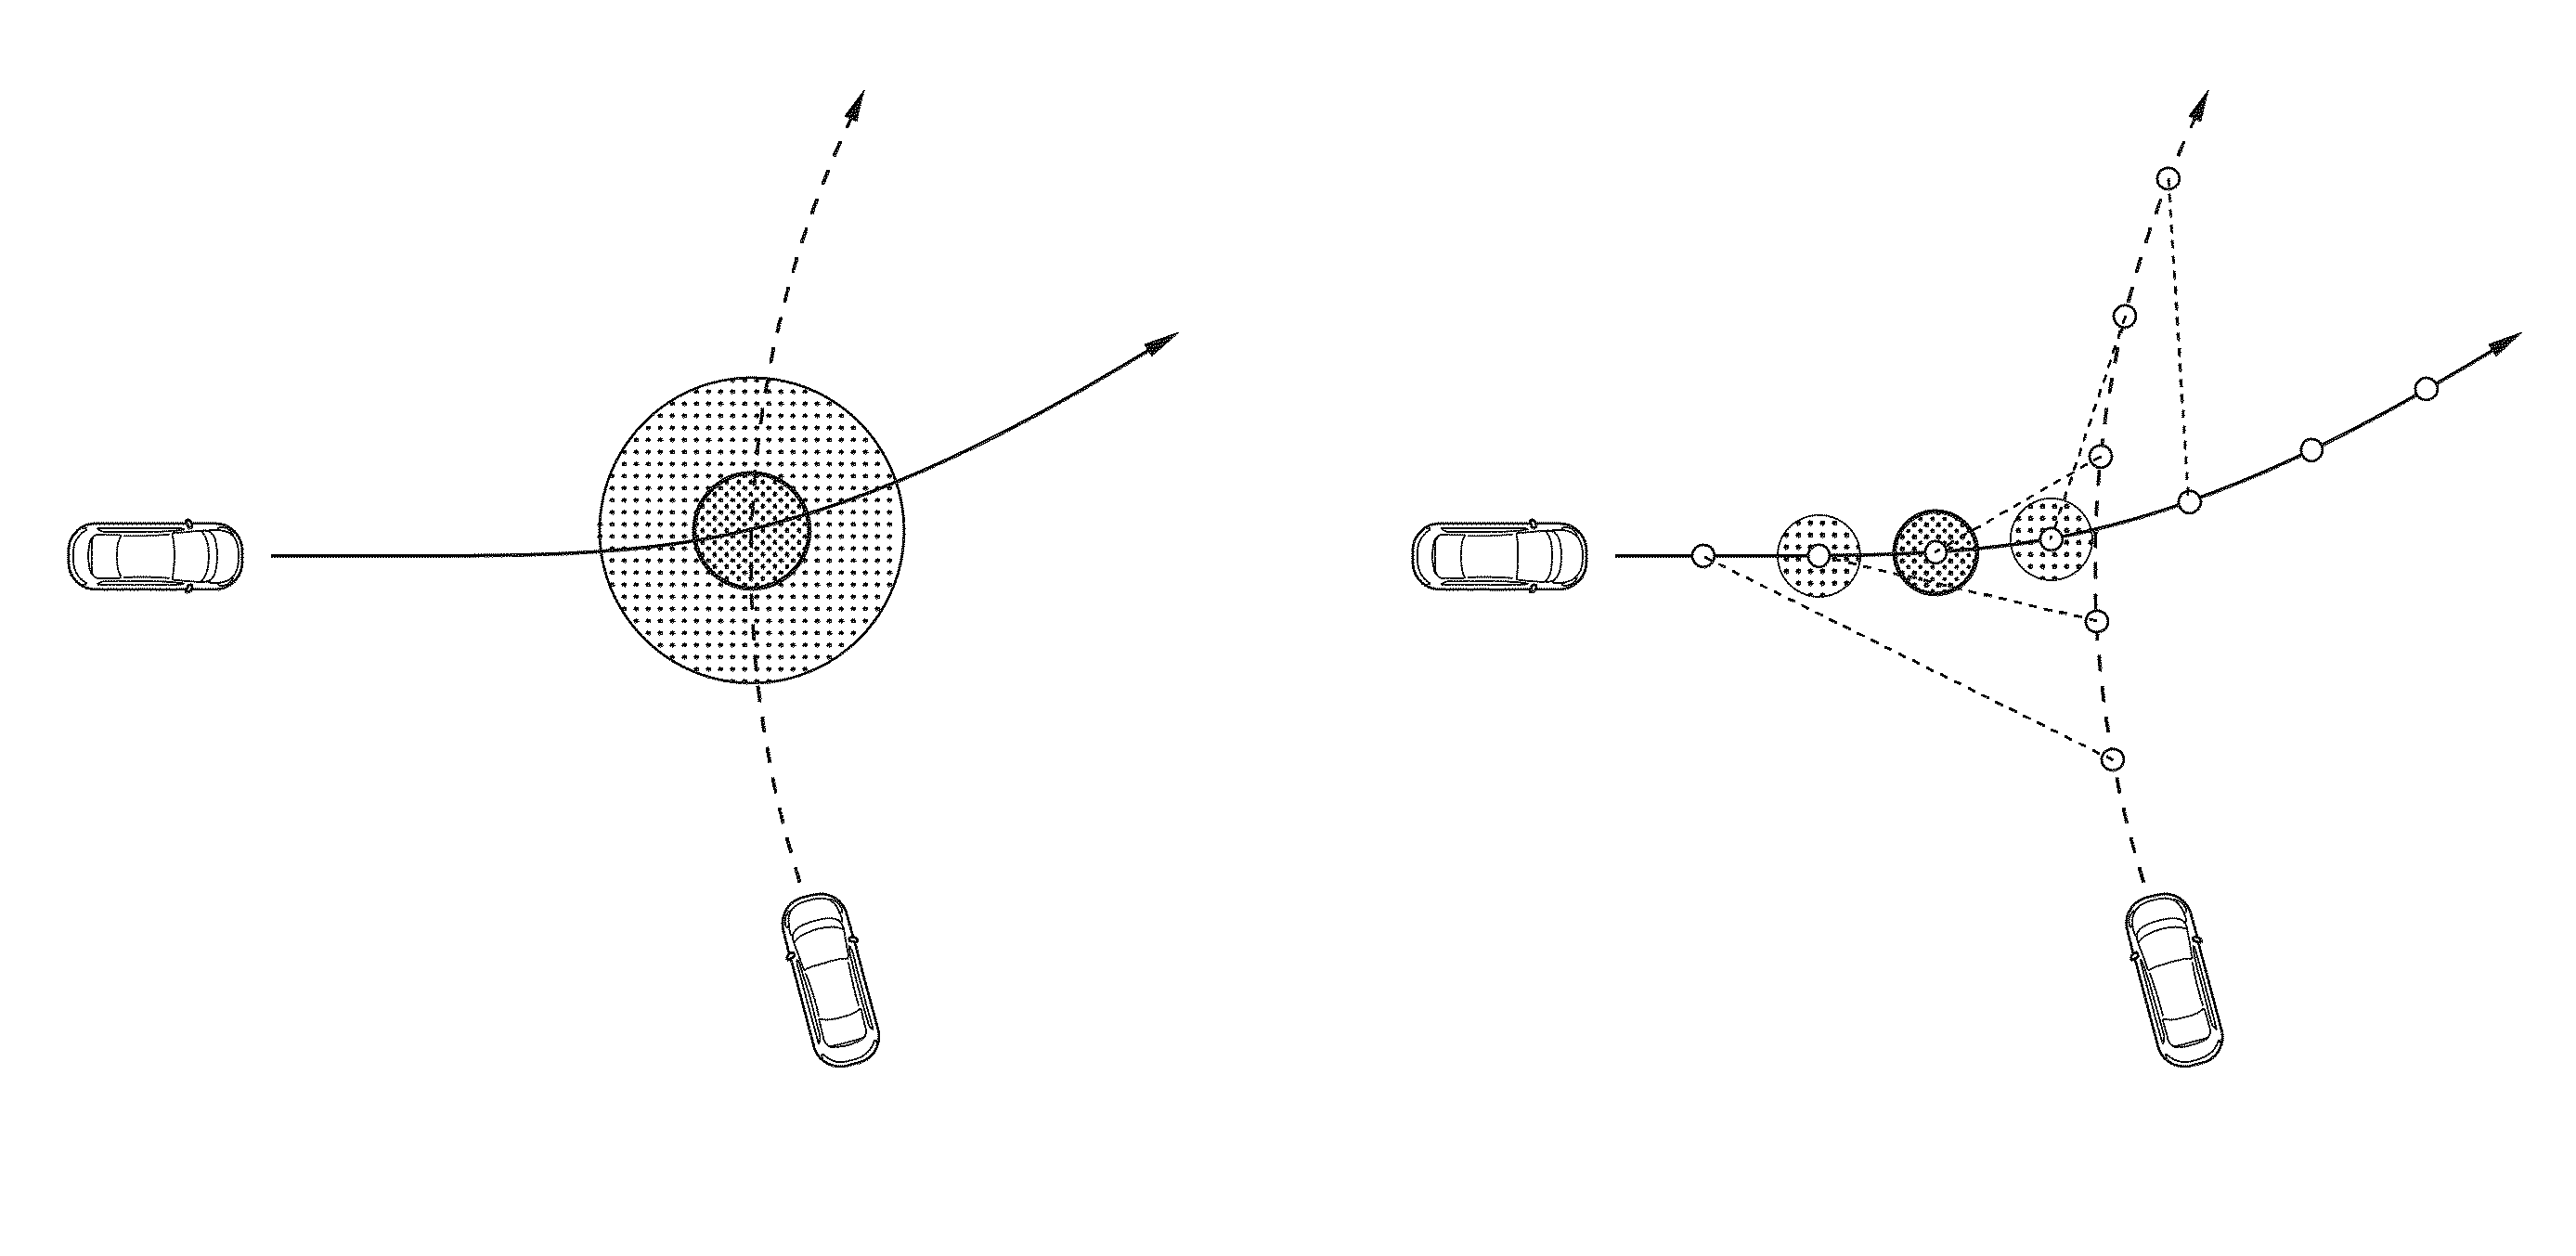 Method and vehicle with an advanced driver assistance system for risk-based traffic scene analysis